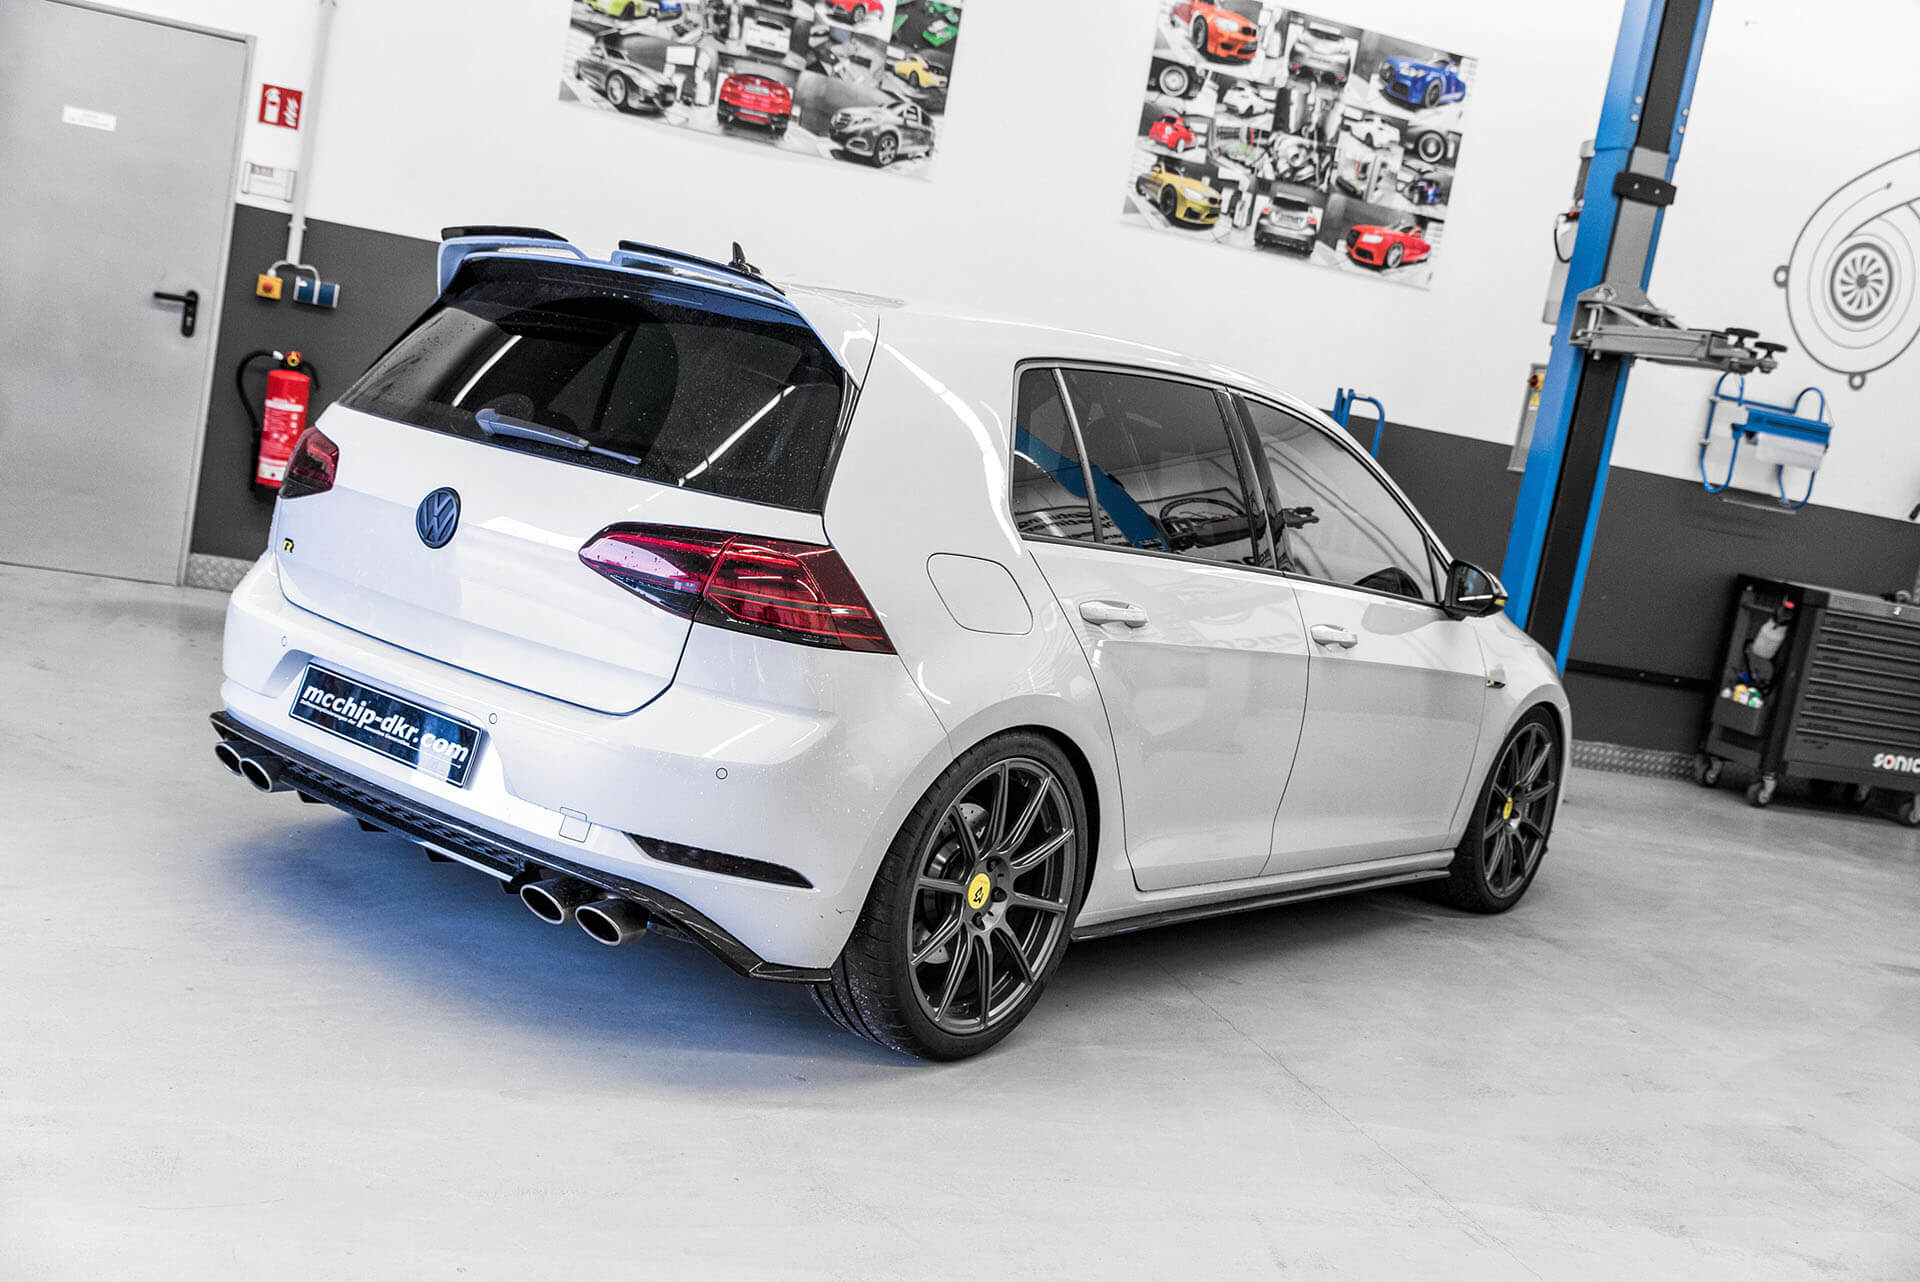 Golf 7 Clubsport project